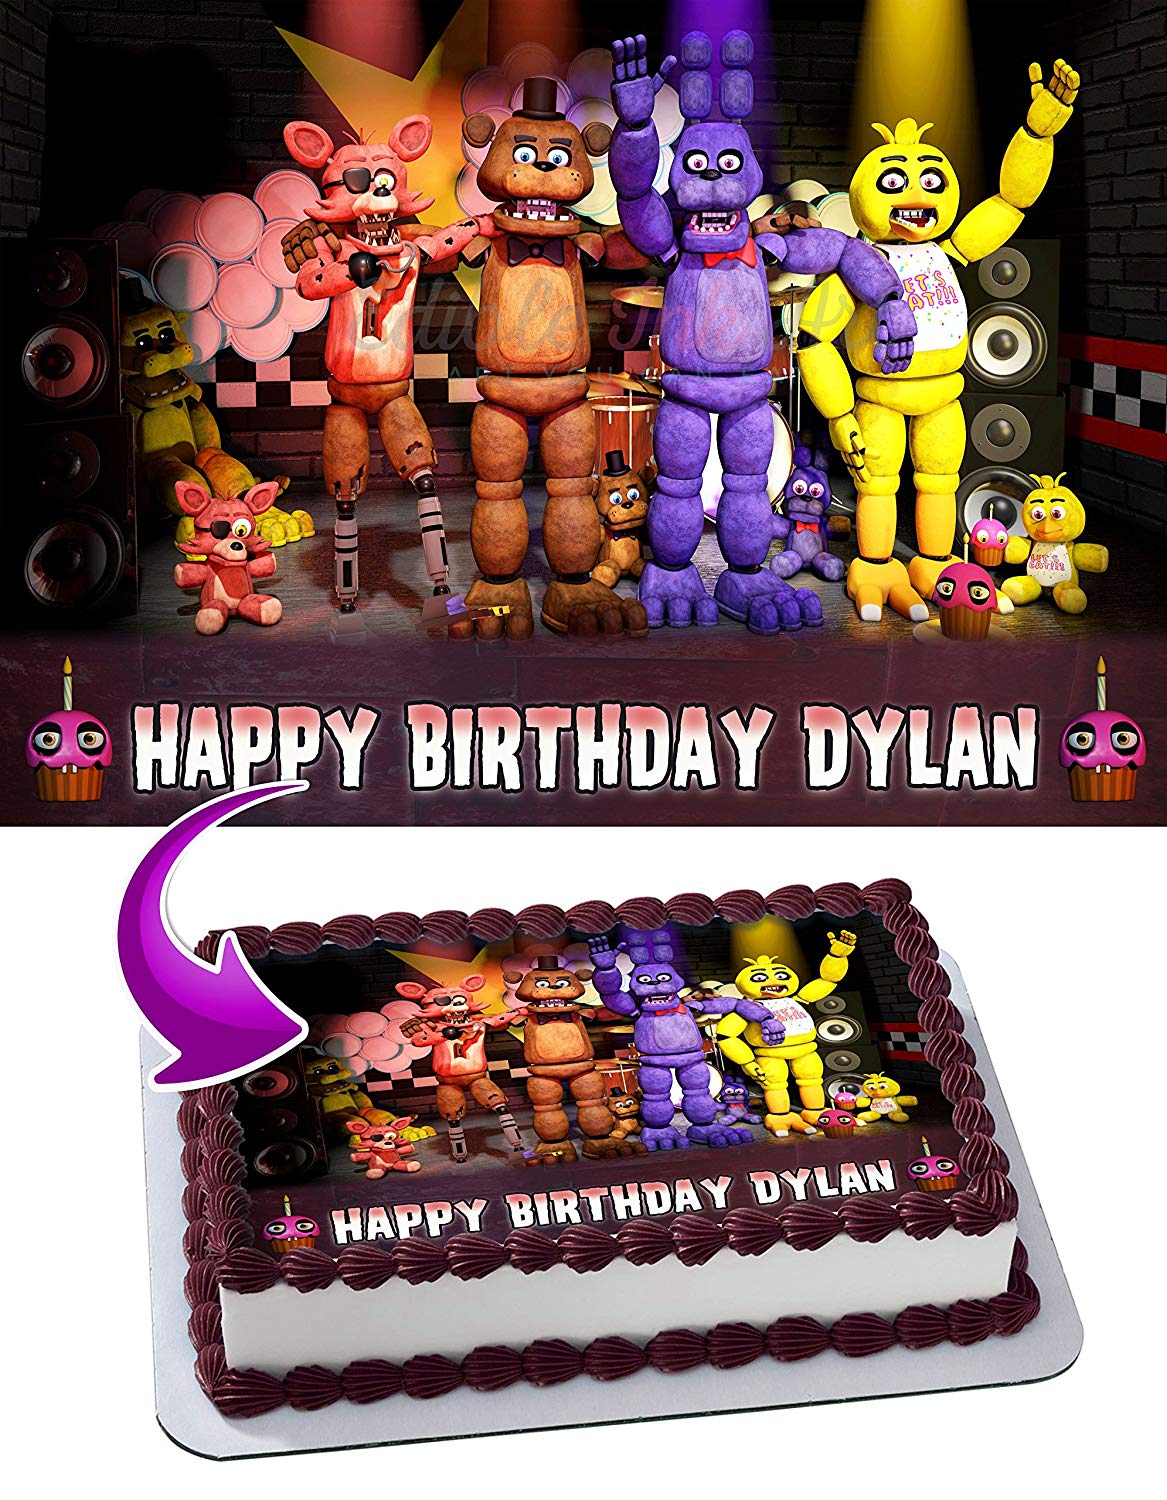 Officially Licensed Five Nights at Freddy's Edible Cake Image Toppers